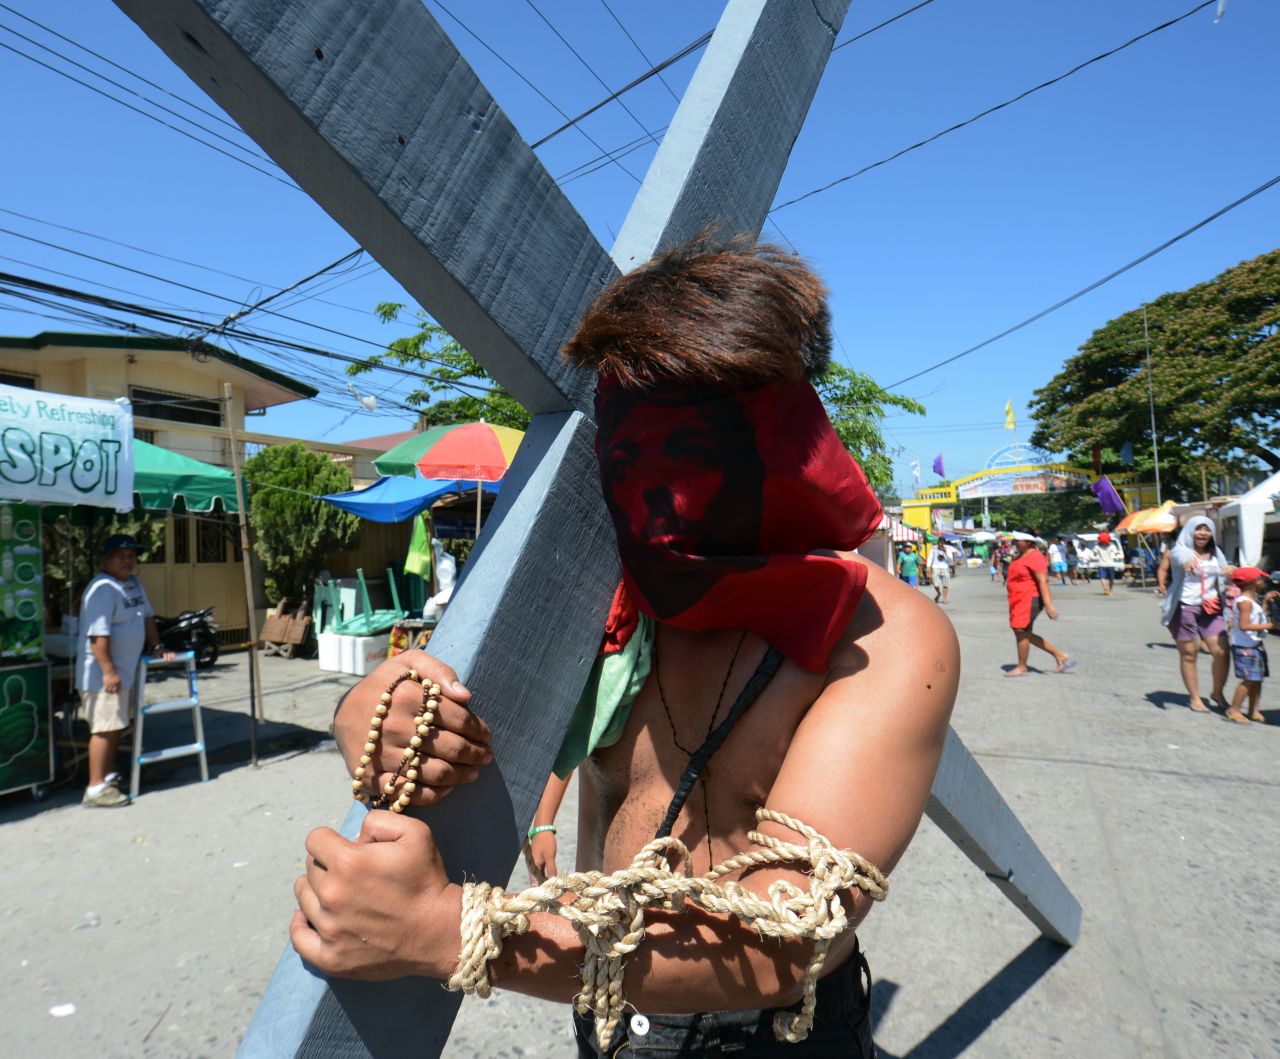 A portrait of Jesus covers a penitent's face as he carries a cross during a Holy Week ceremony in the northern province of Pampanga in the Philippines. 